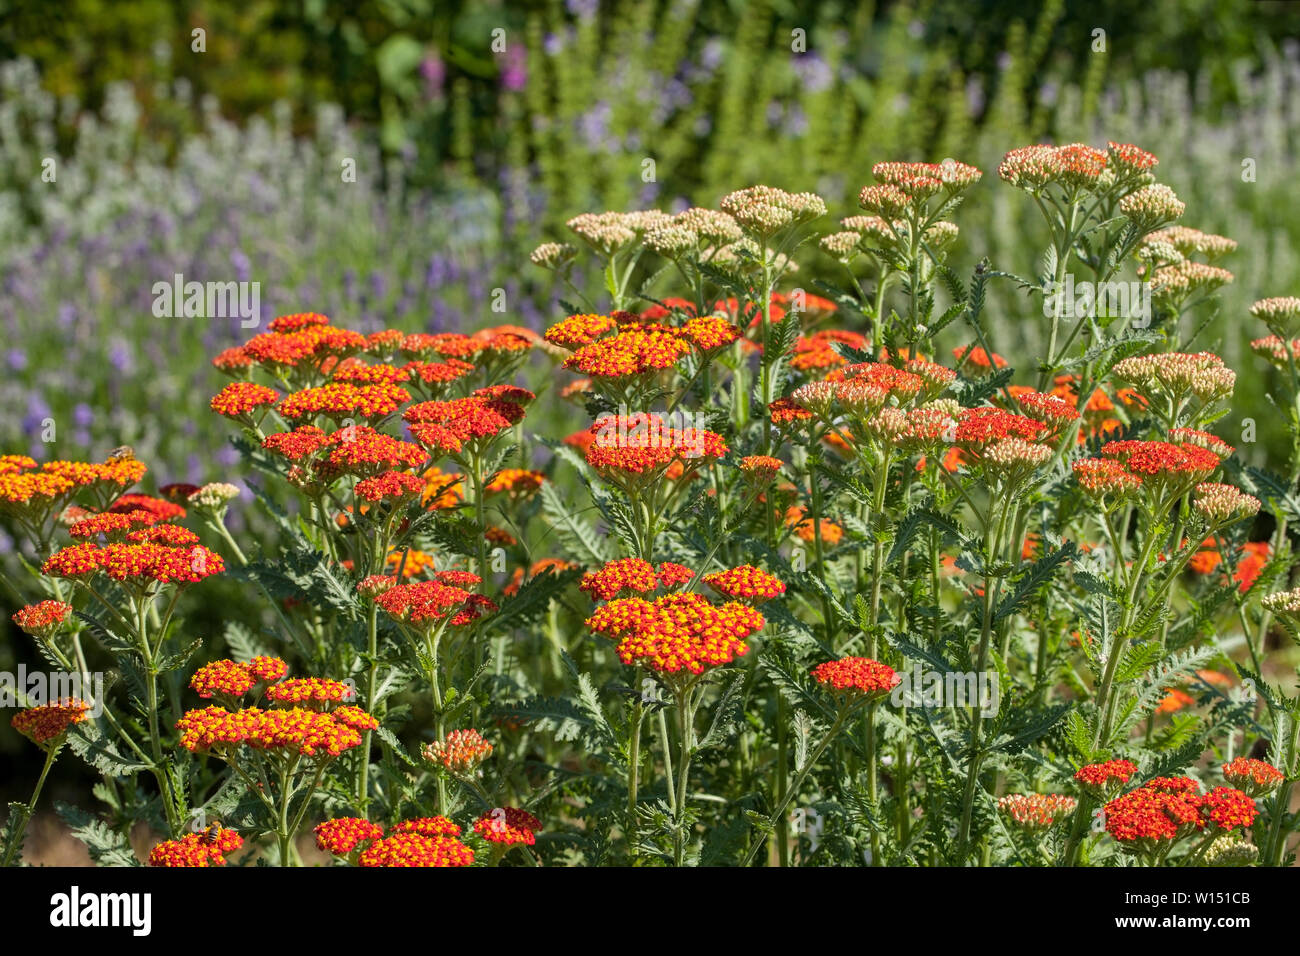 Achillea millefolium, commonly known as yarrow is a flowering plant in the family Asteraceae. Stock Photo